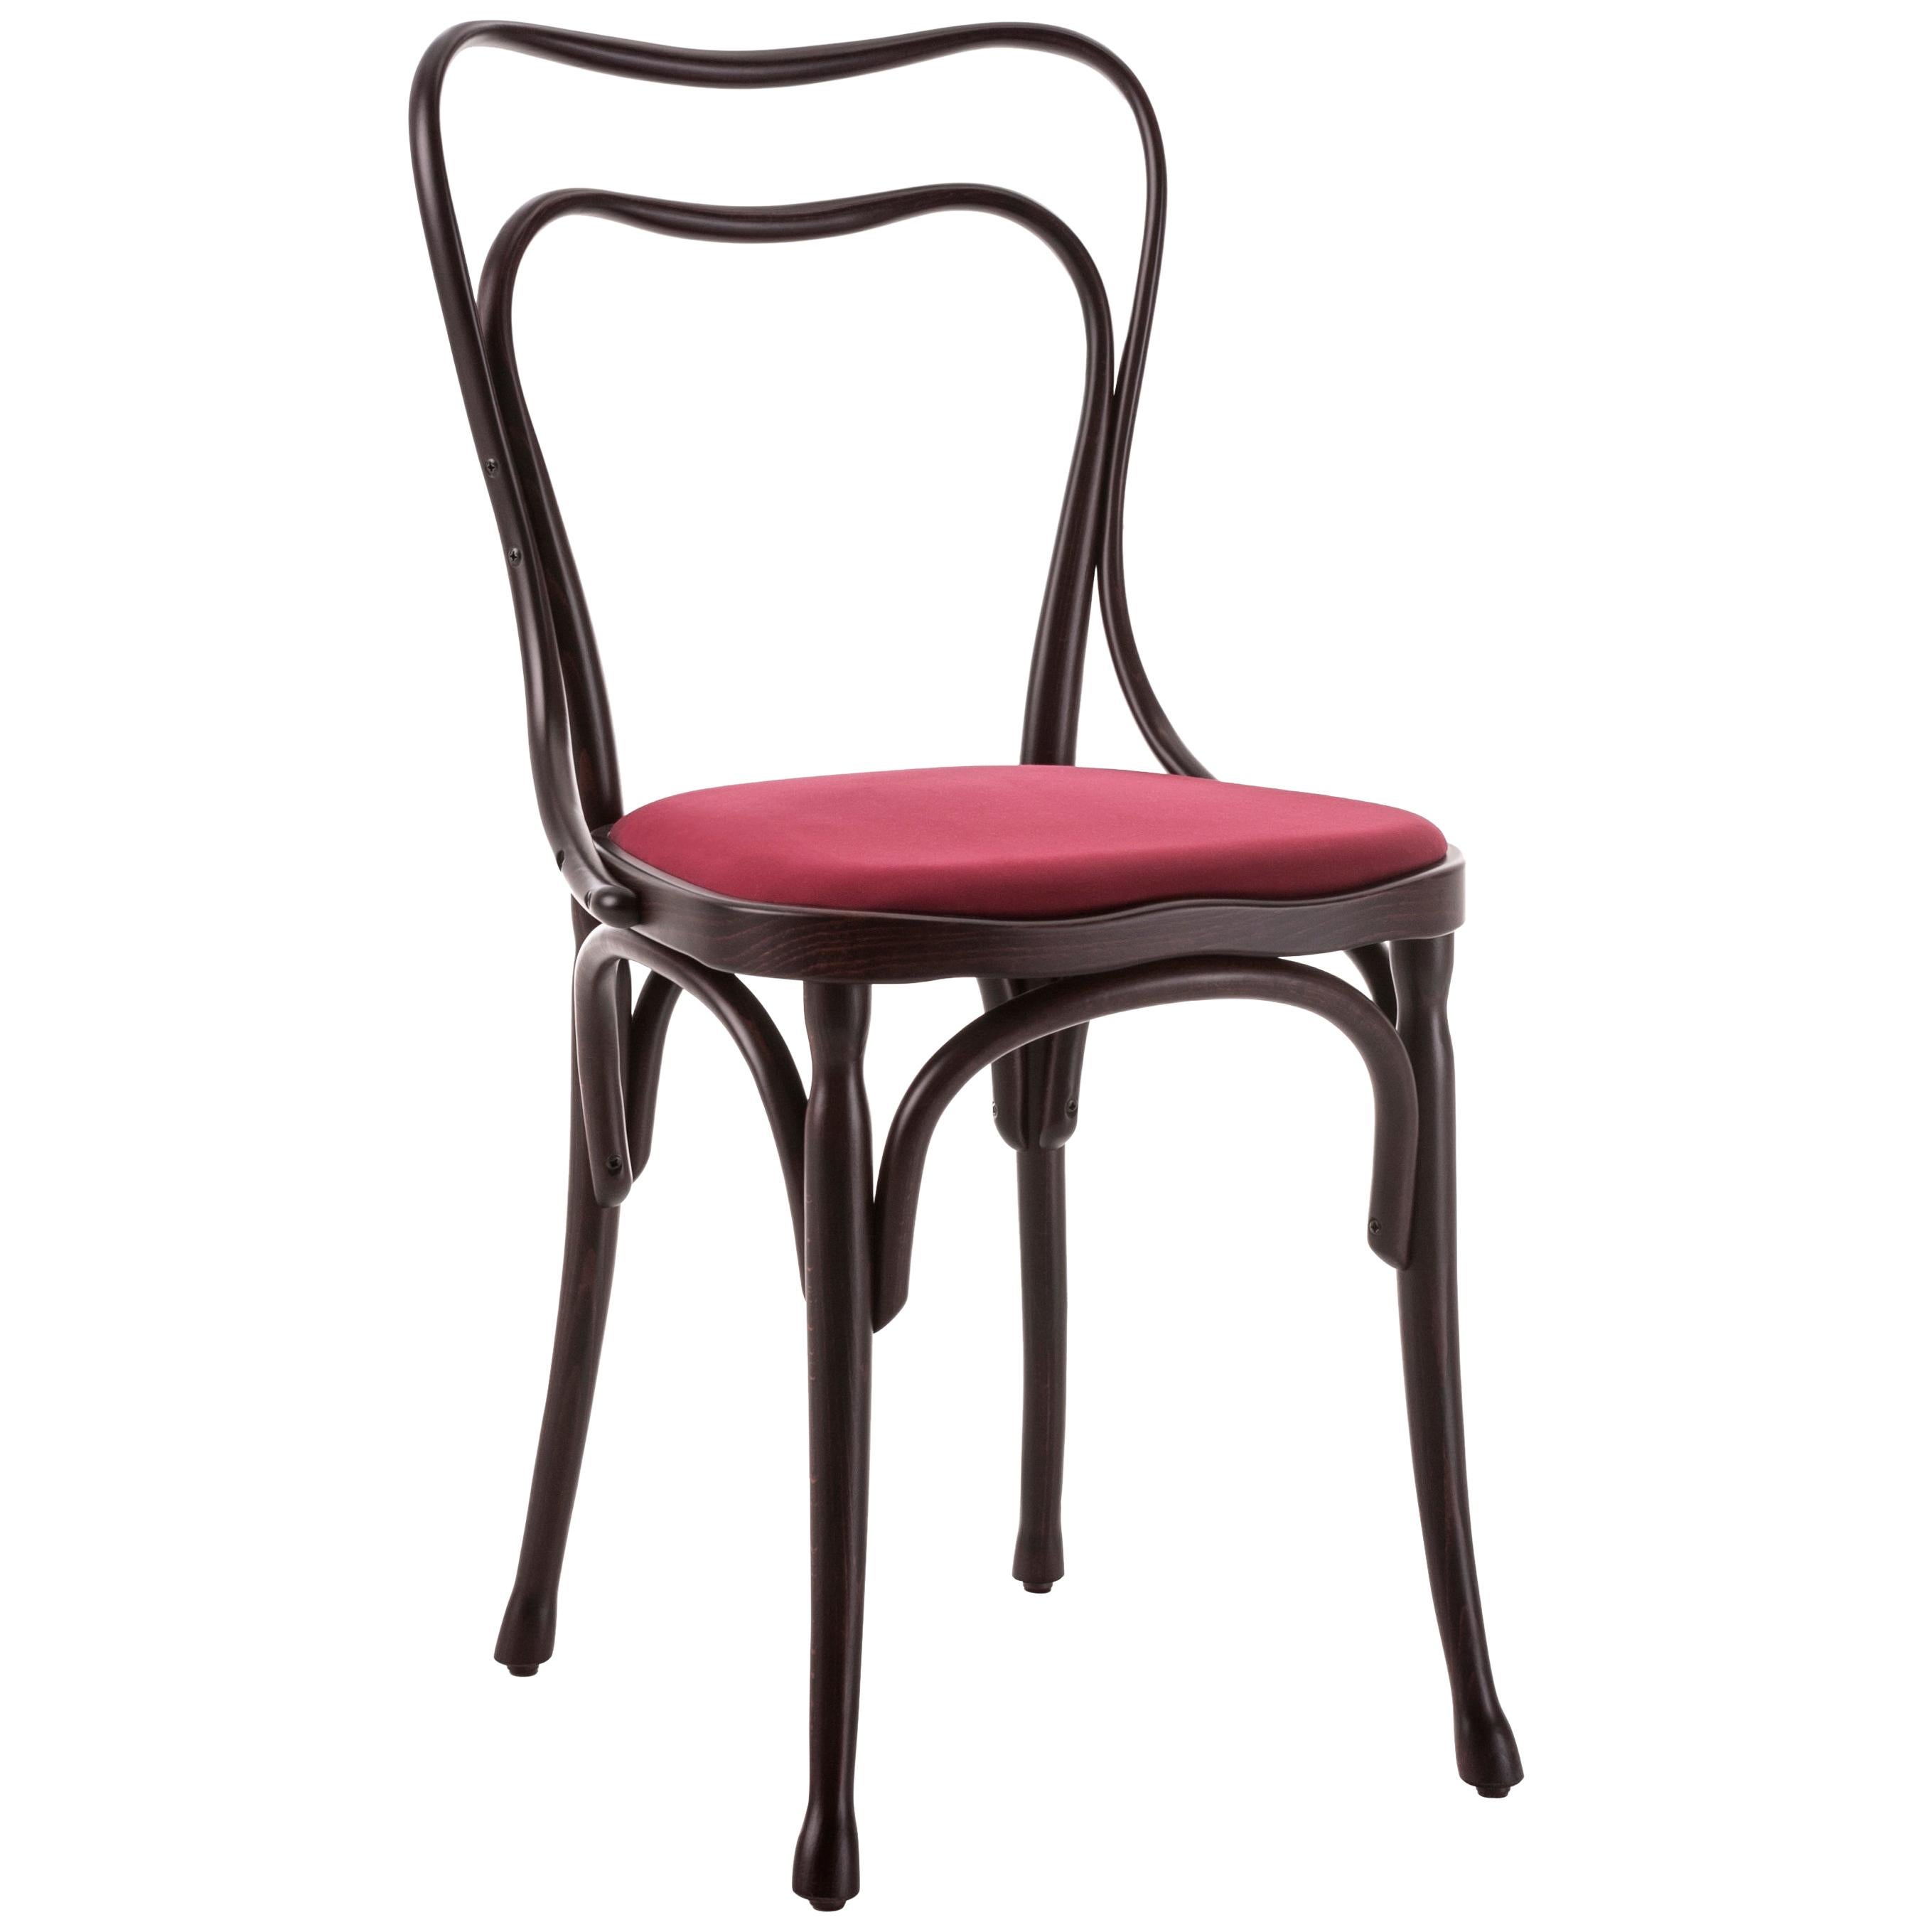 Gebrüder Thonet Vienna GmbH Loos Cafe Museum in Wenge with Upholstered Seat For Sale